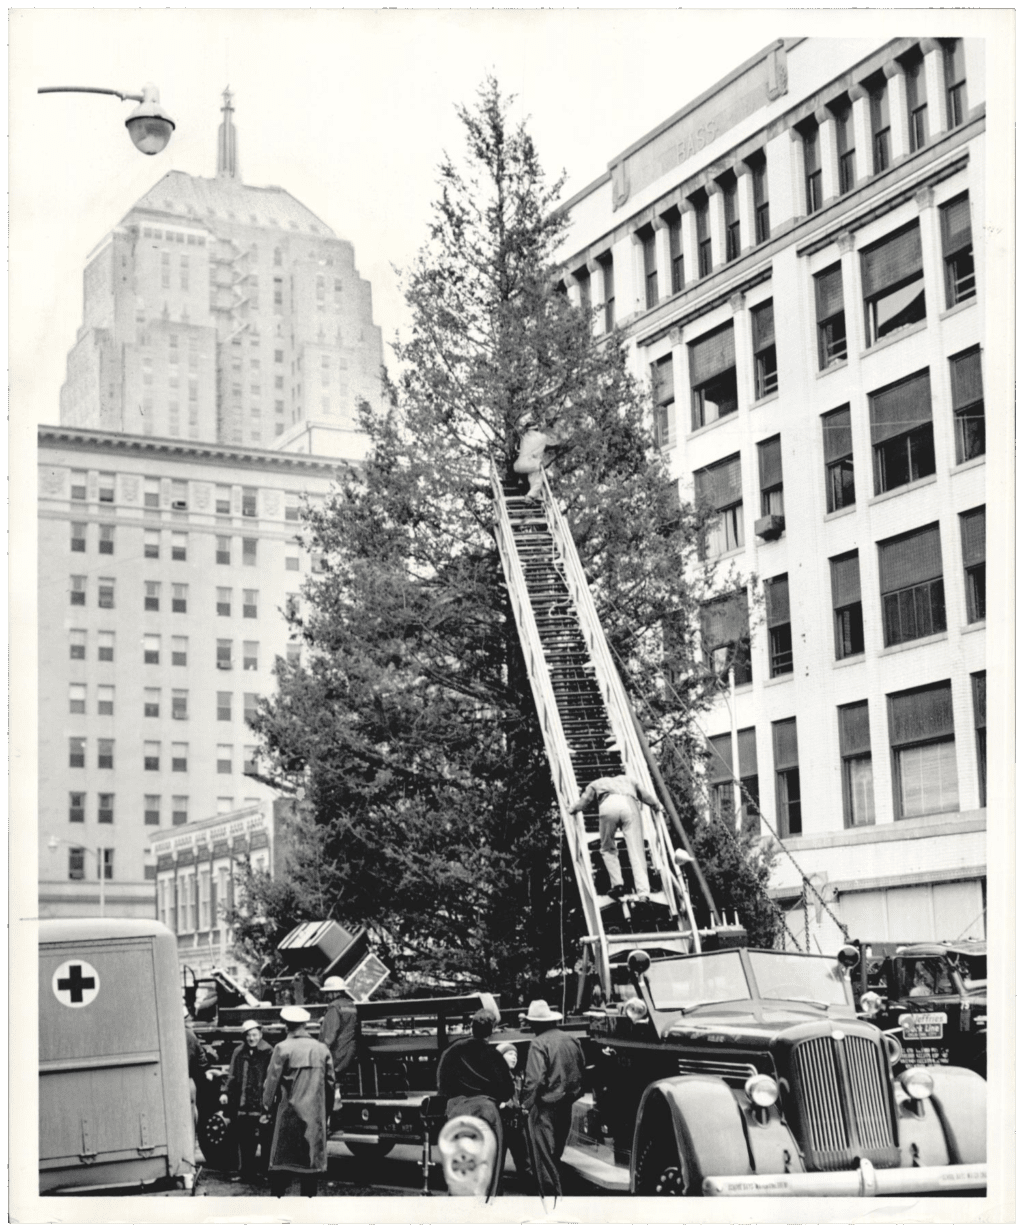 Like mountain climbers scaling the Alps, firemen and volunteer workers climb a ladder to decorate the giant red cedar "Tree of Lights" which will glow over the downtown shopping scene during the Christmas season.